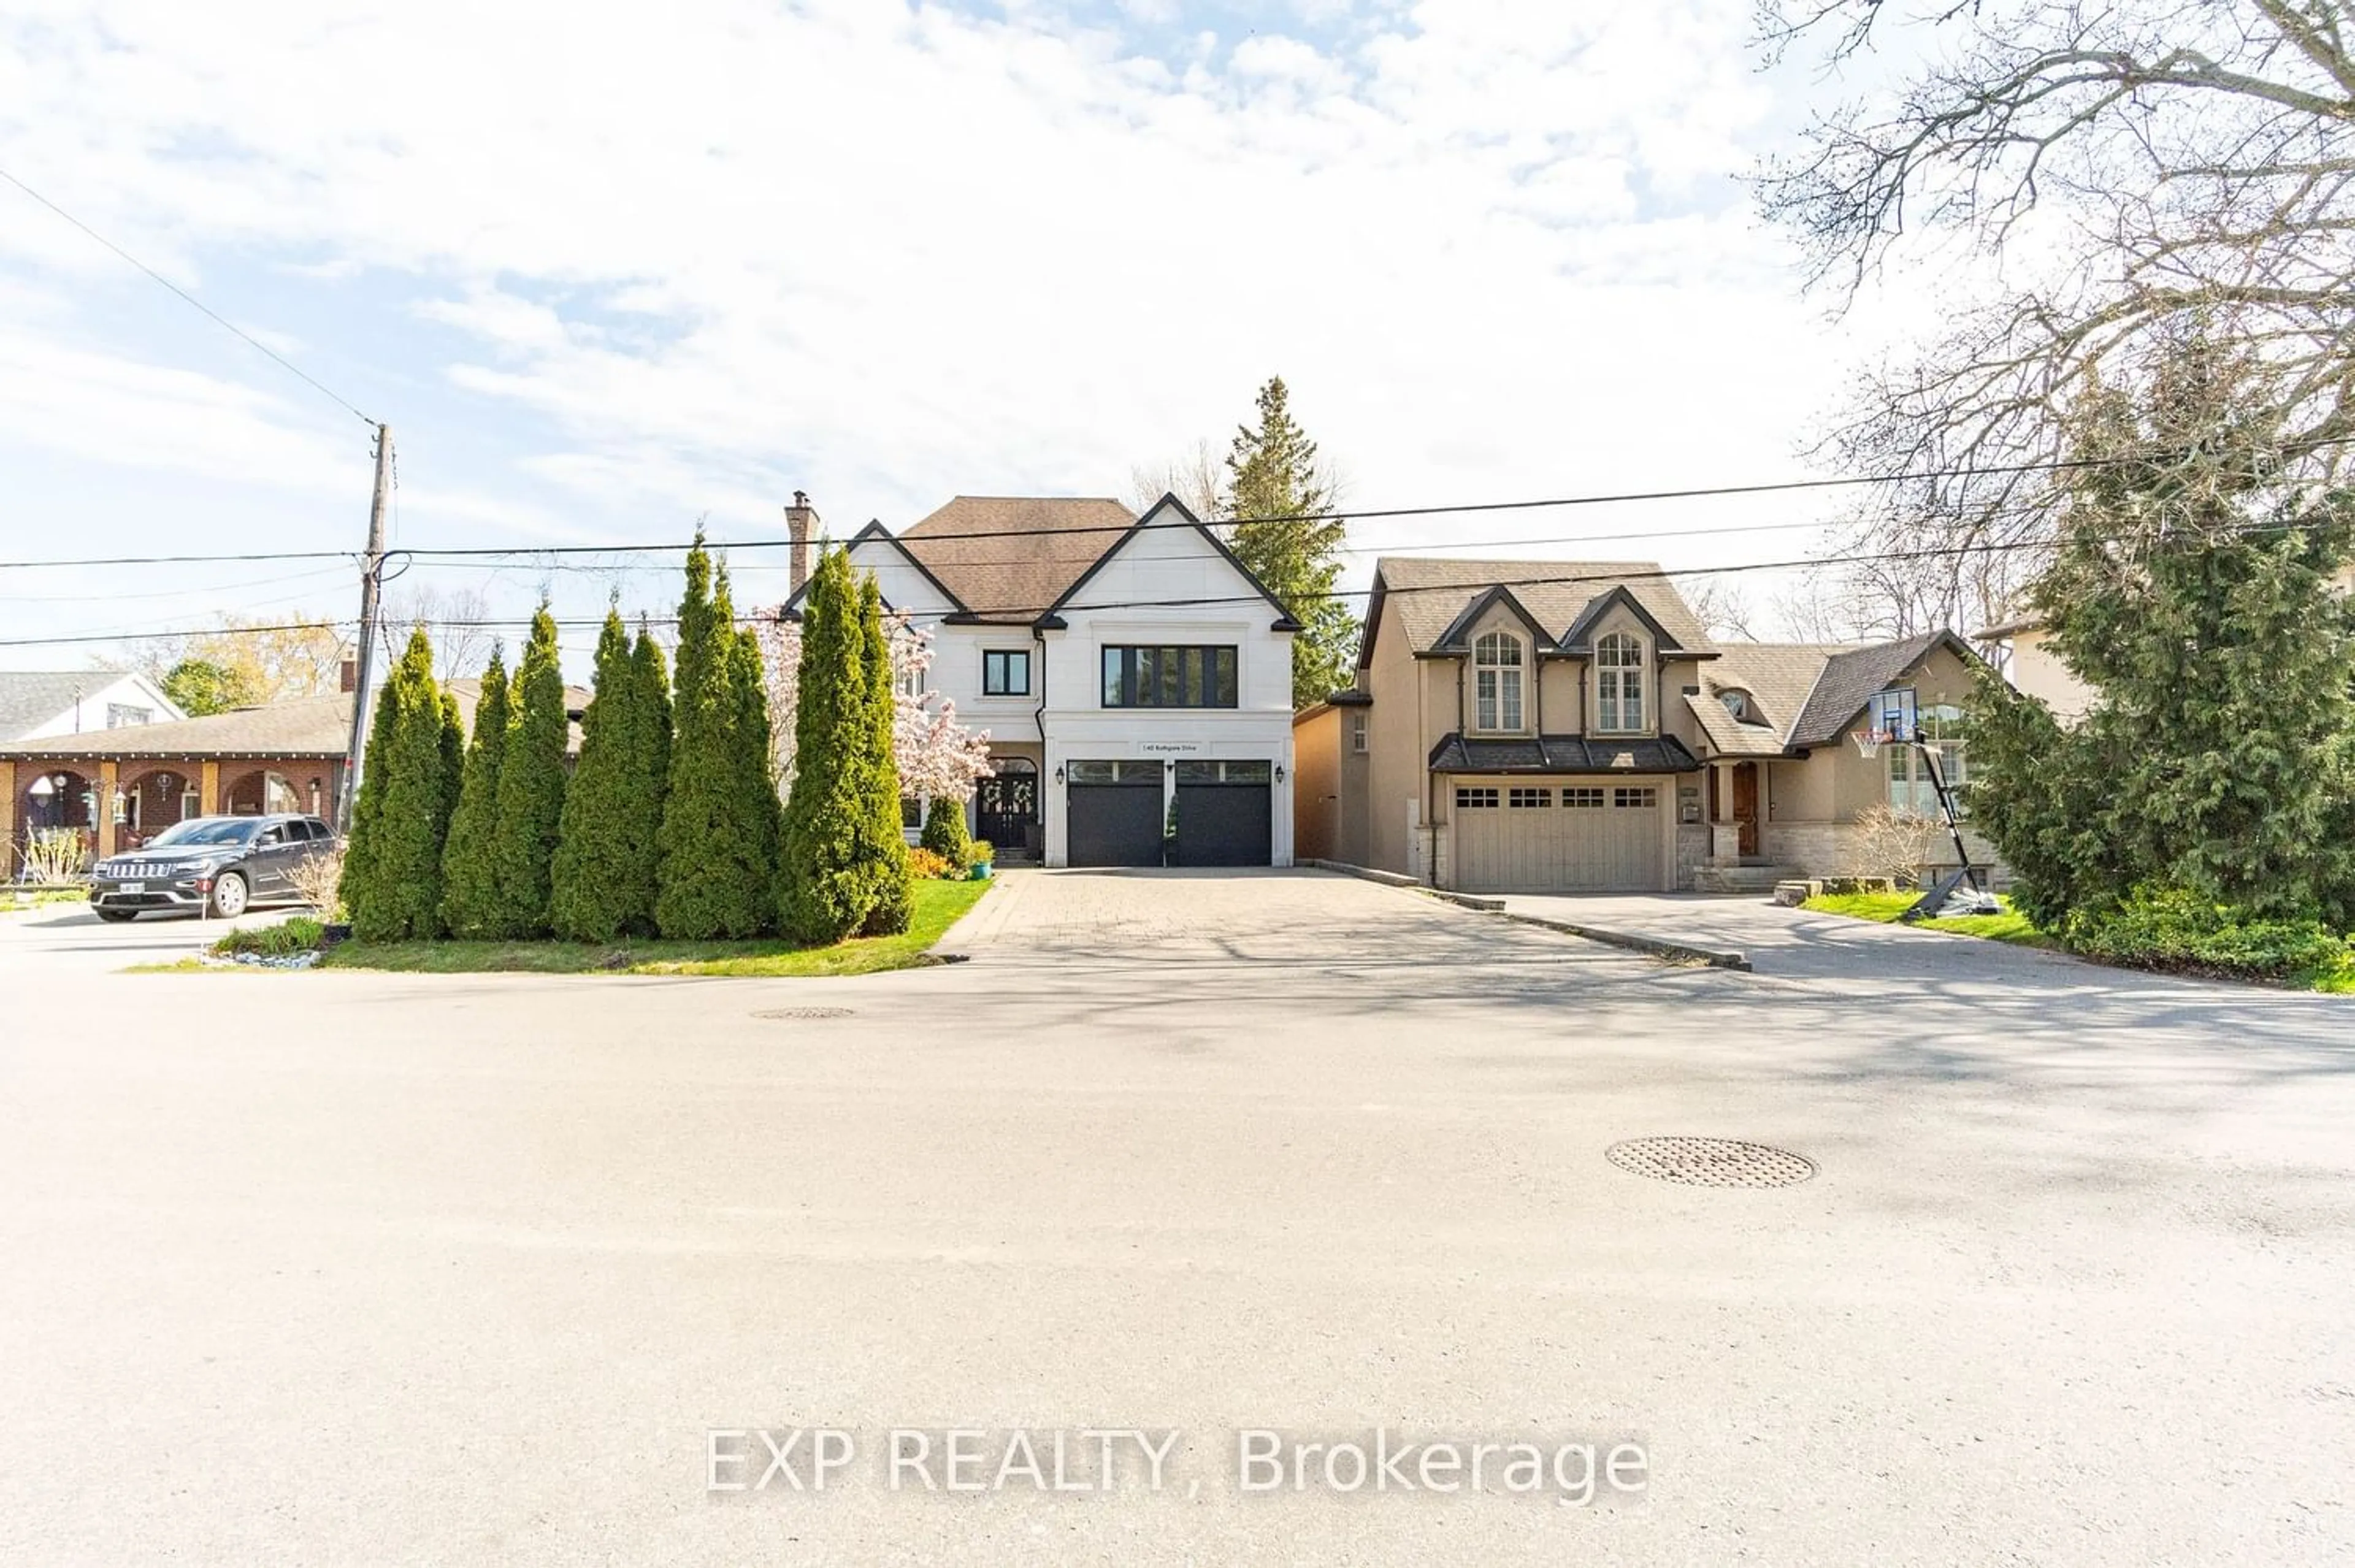 Frontside or backside of a home for 140 Bathgate Dr, Toronto Ontario M1C 1T5